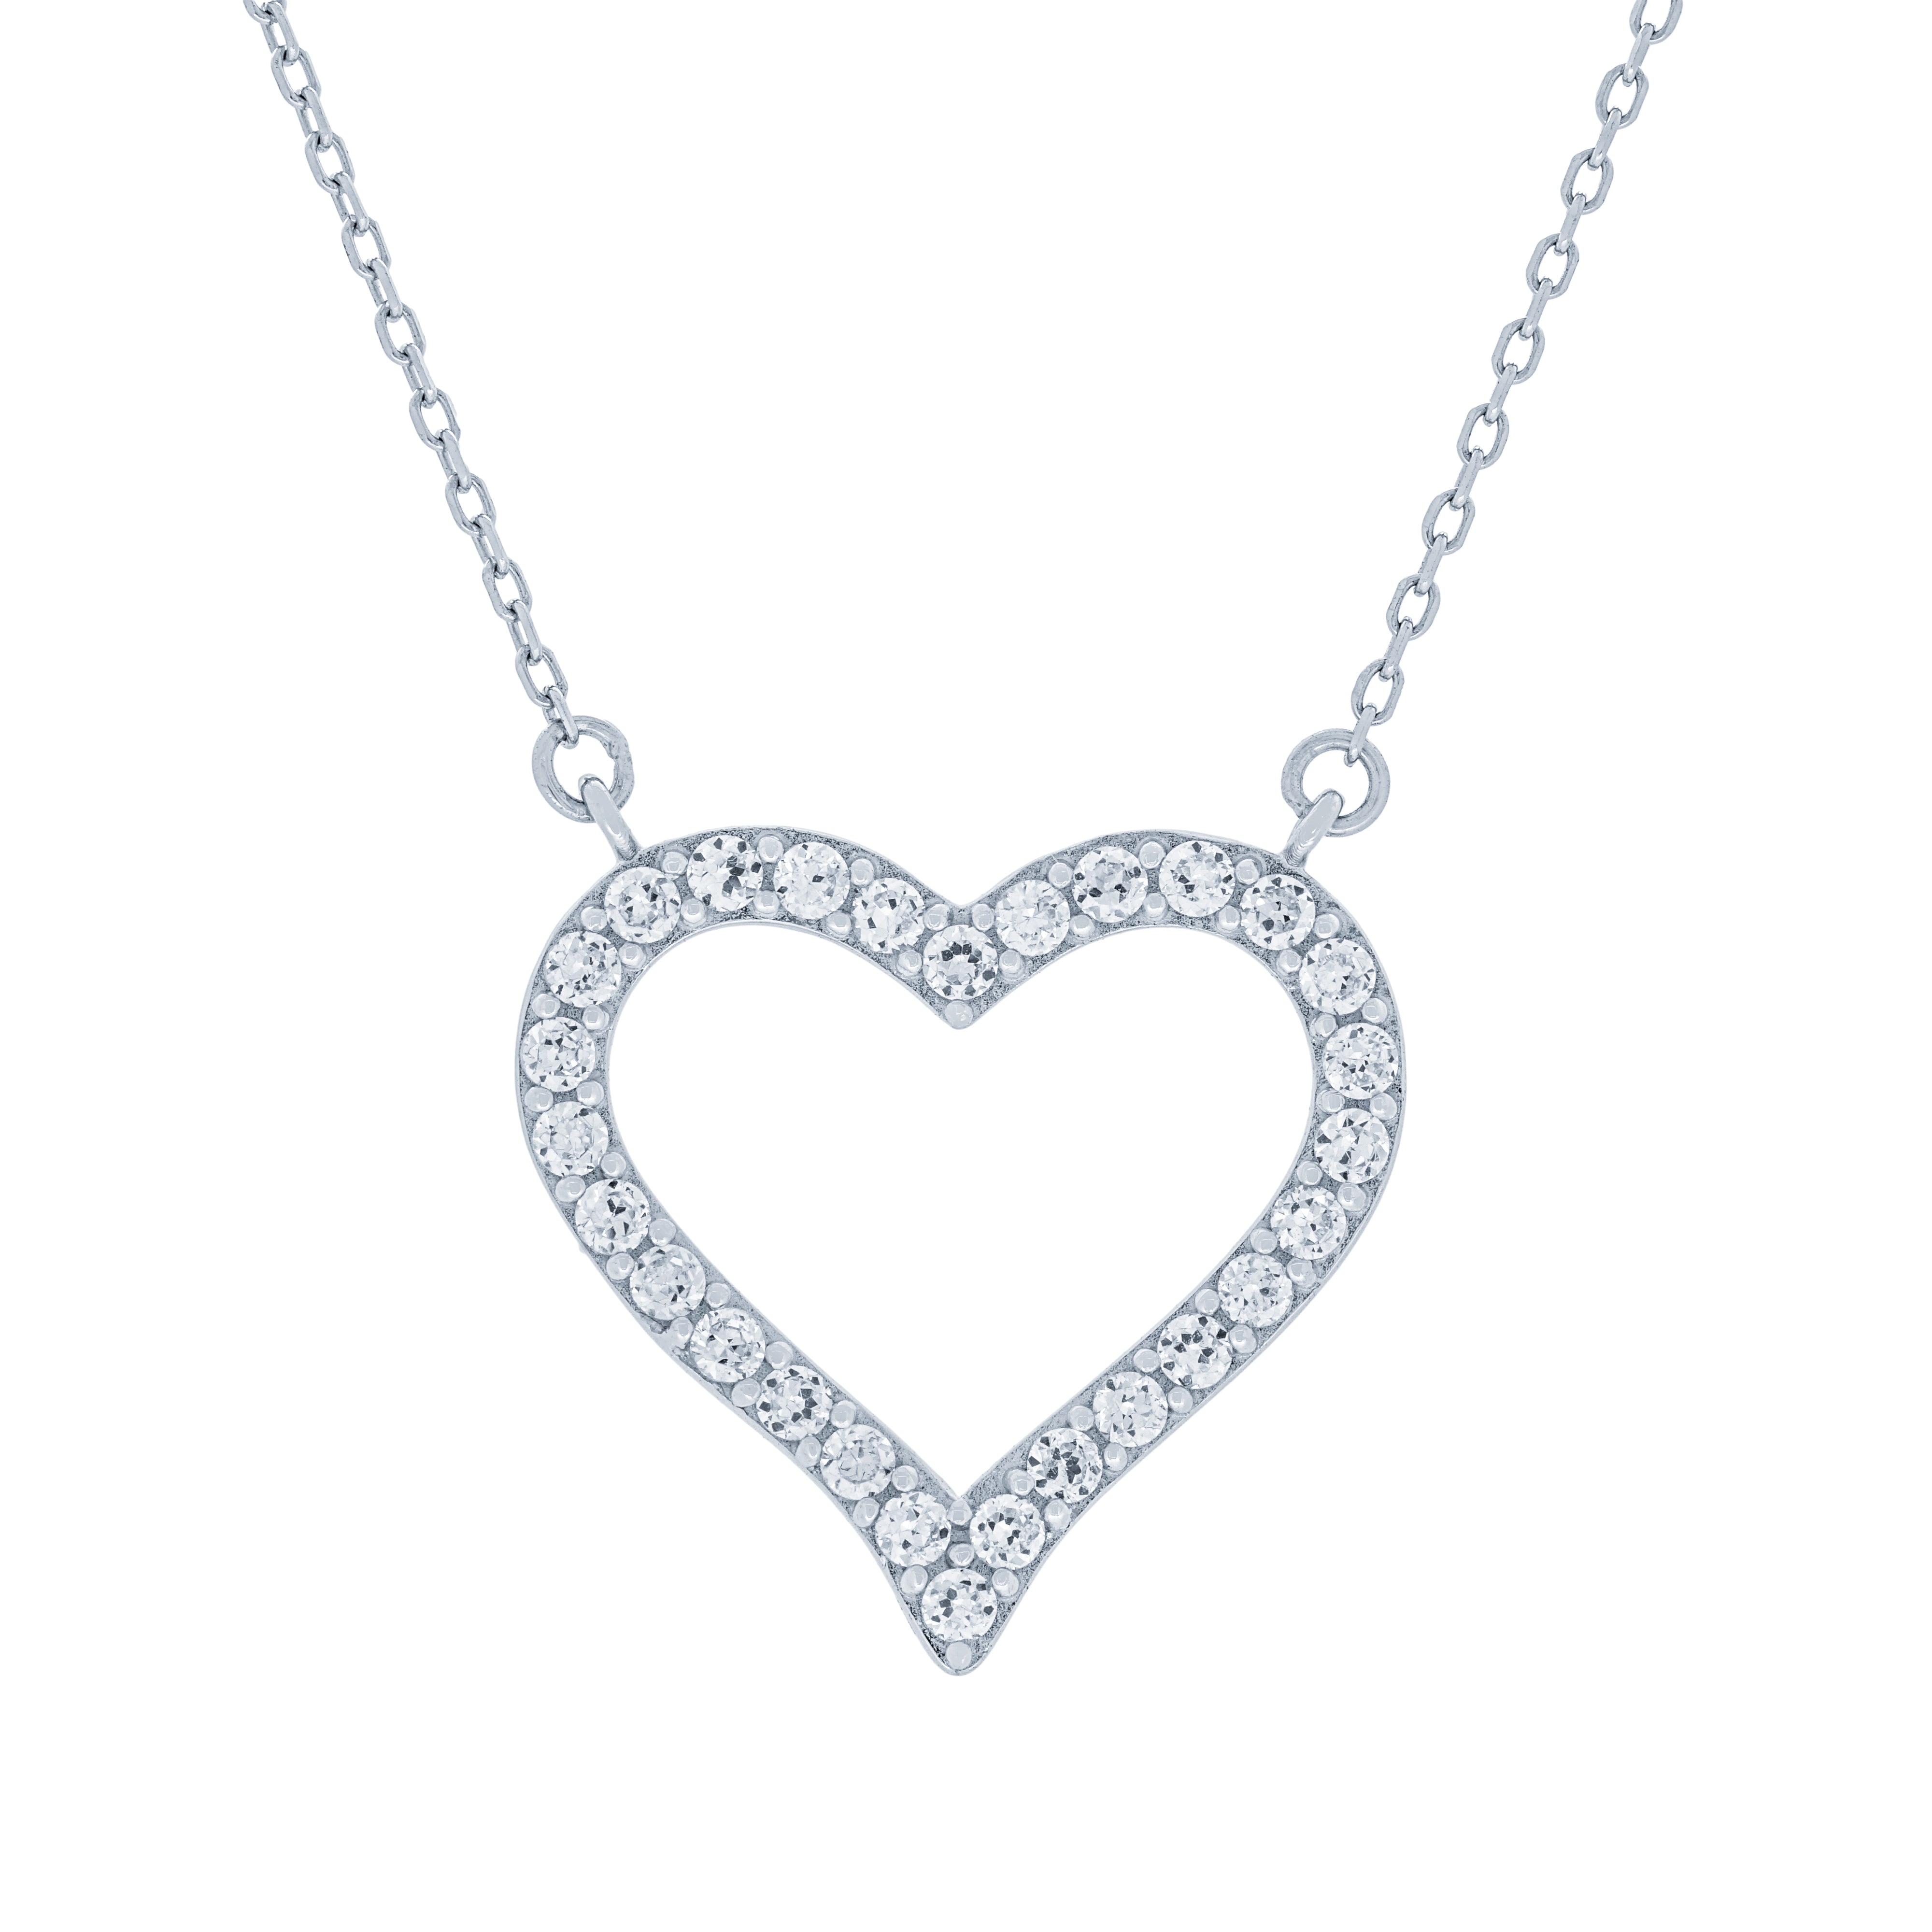 (100138) White Cubic Zirconia Heart Pendant Necklace In Sterling Silver